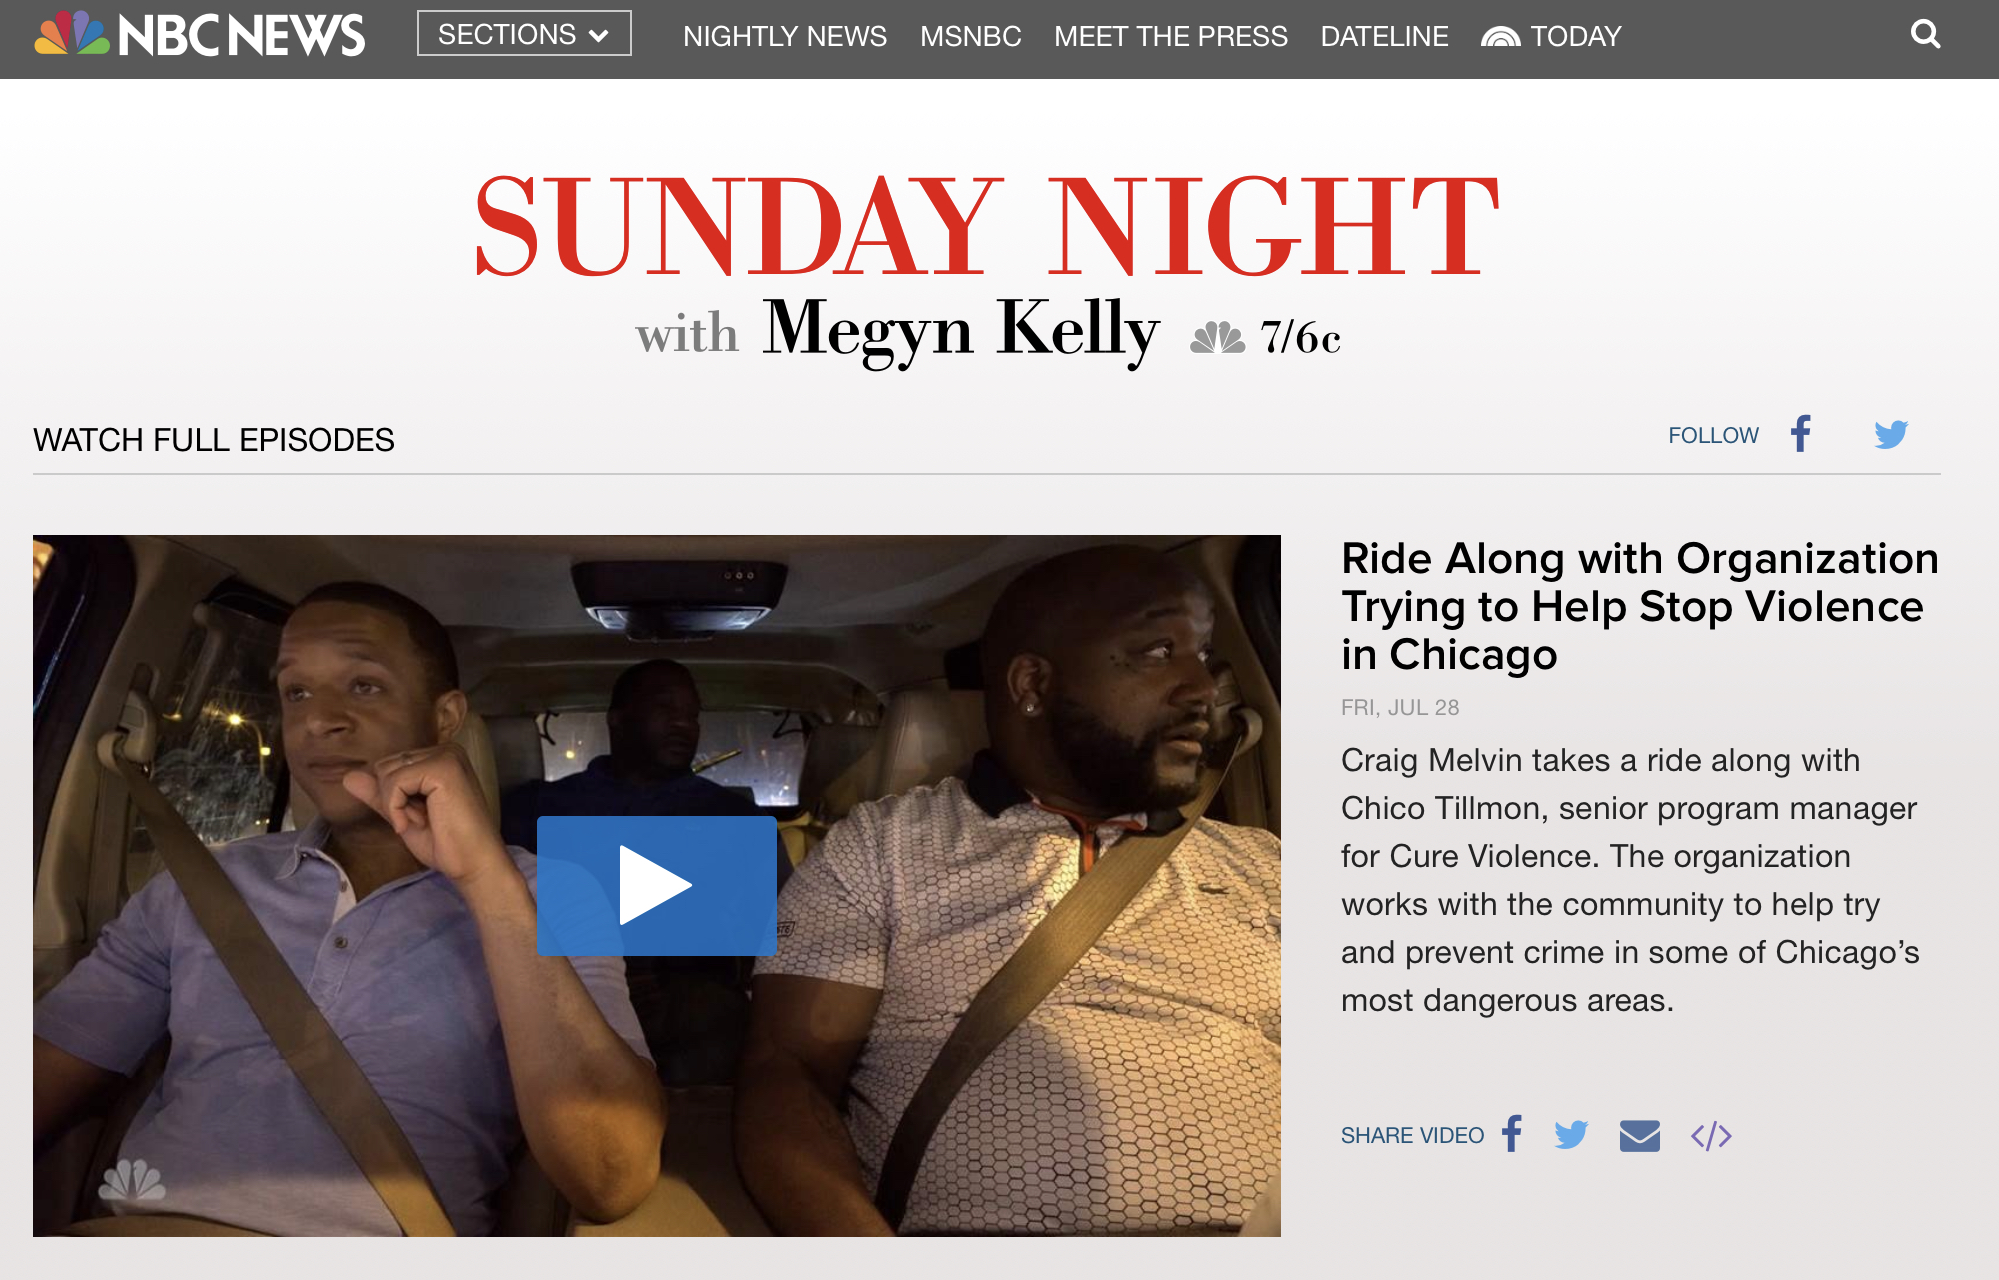 NBC/Megyn Kelly: Ride Along with Organization Trying to Help Stop Violence in Chicago